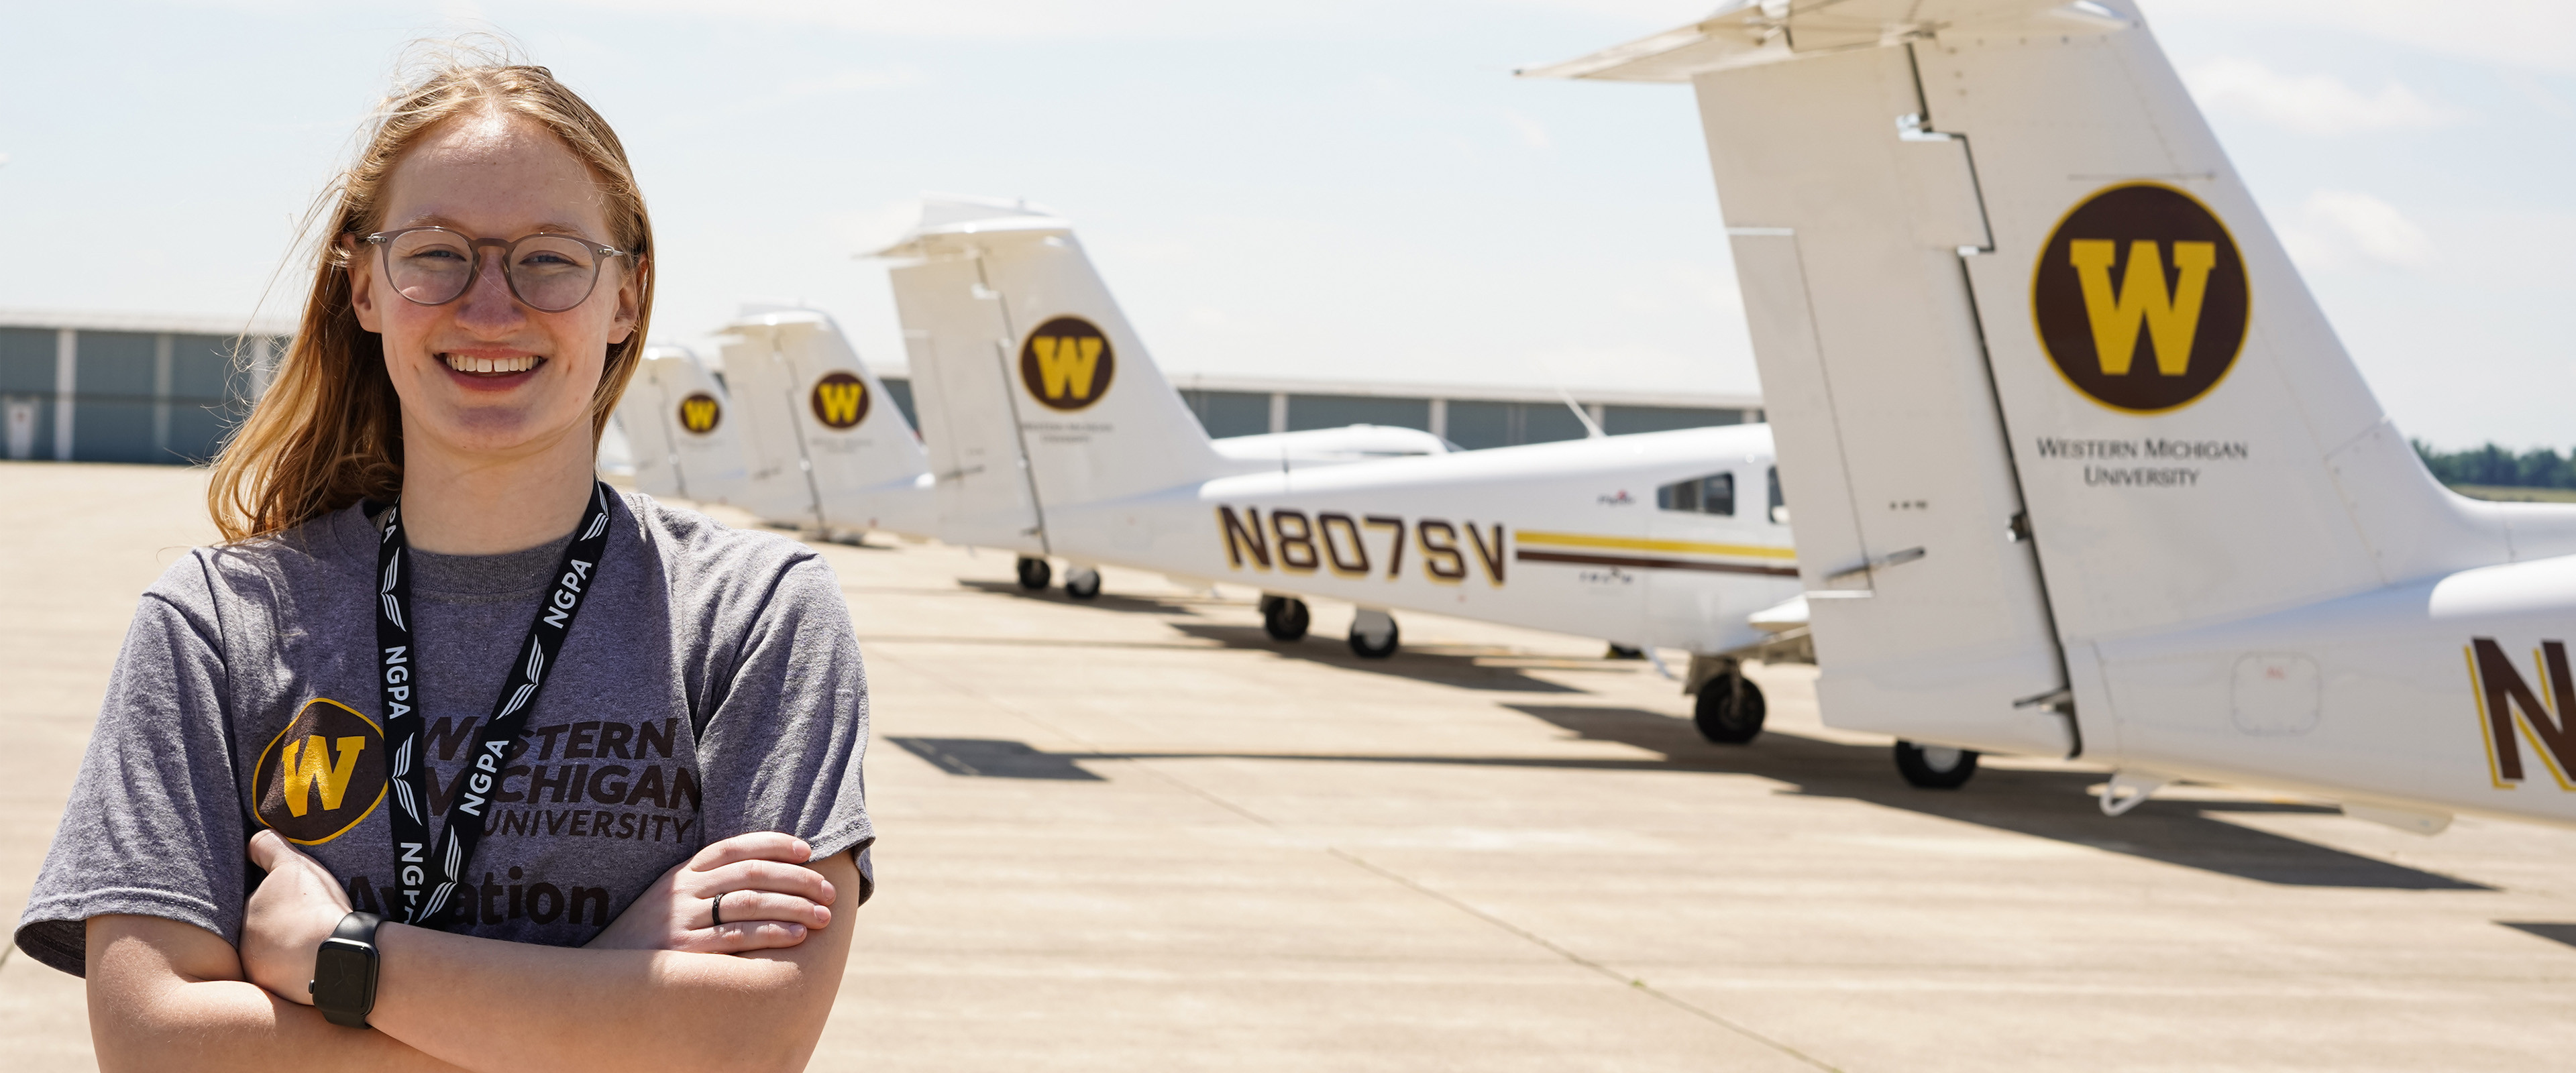 A pilot student standing in front of the WMU planes.